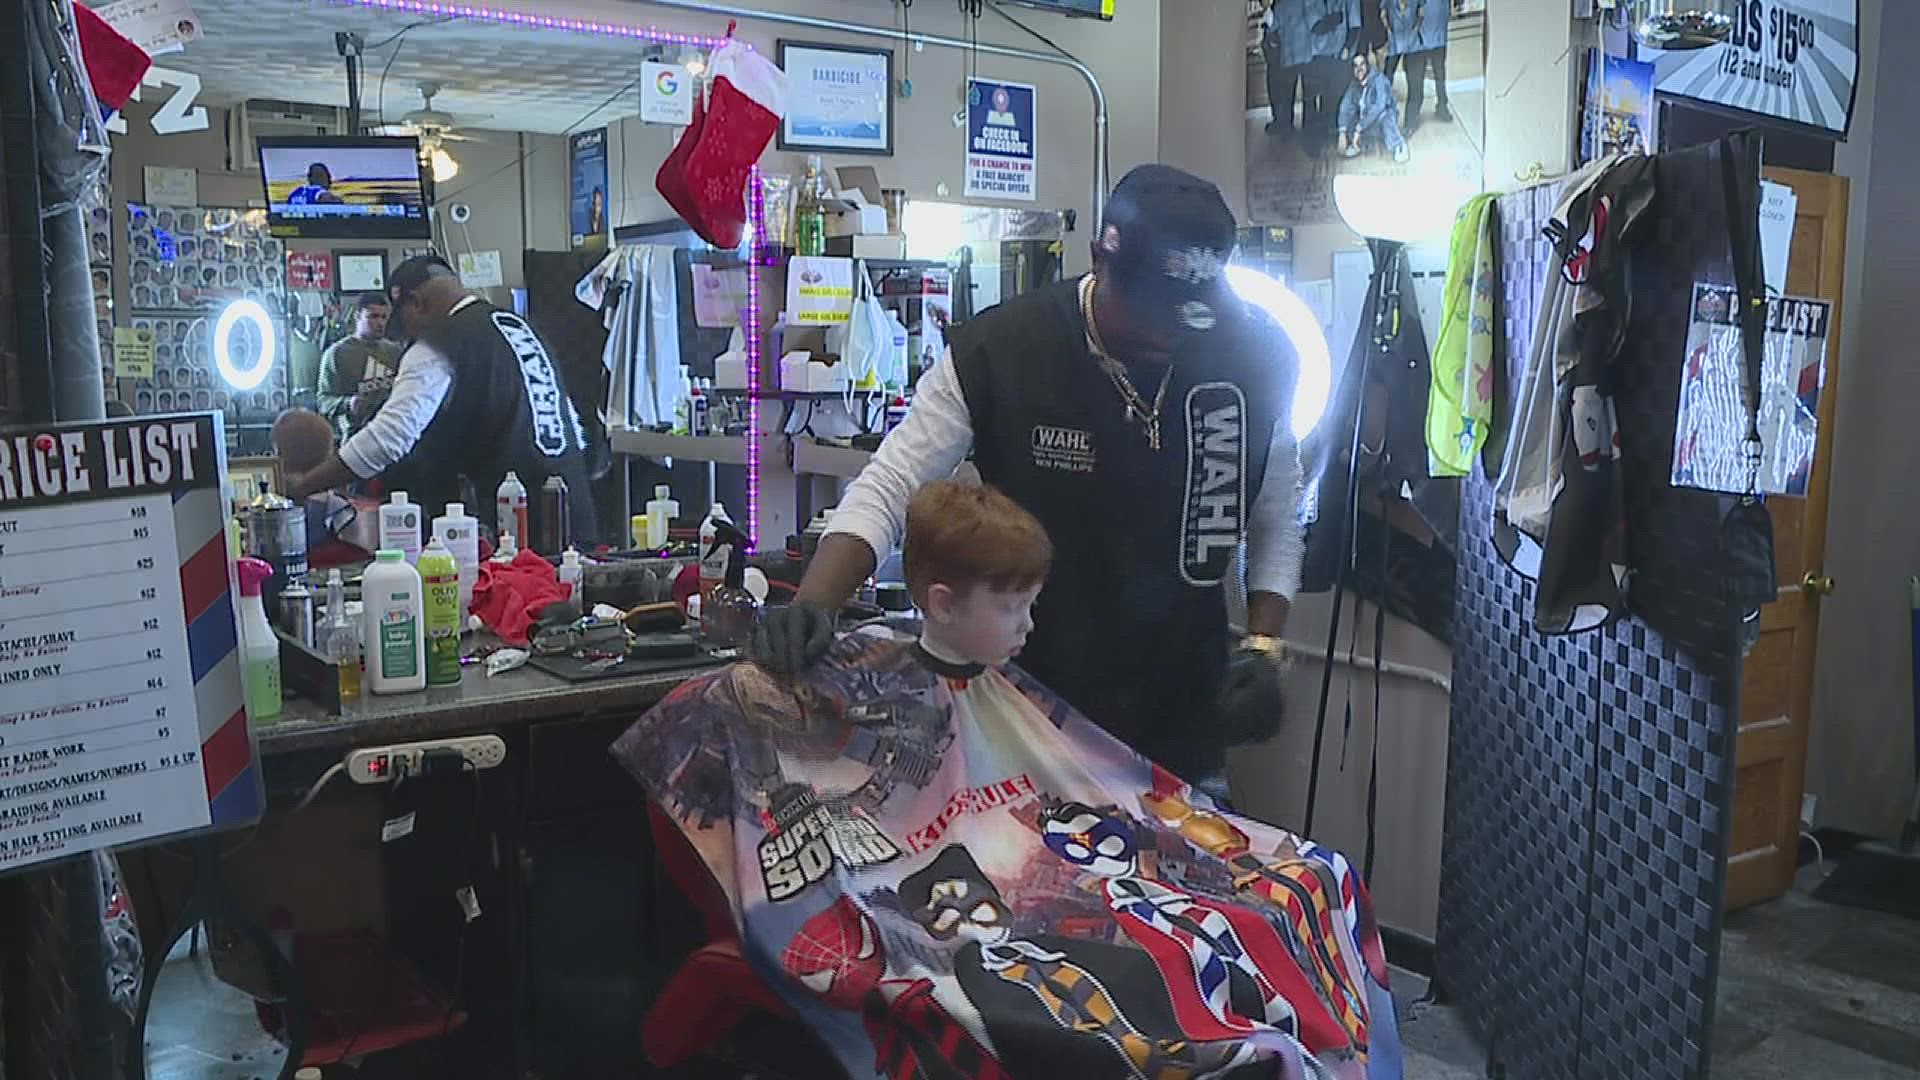 Ben's Phresh Kutz Barber Shop offered free haircuts on Dec. 24 to kids and the elderly to help give back for Christmas.